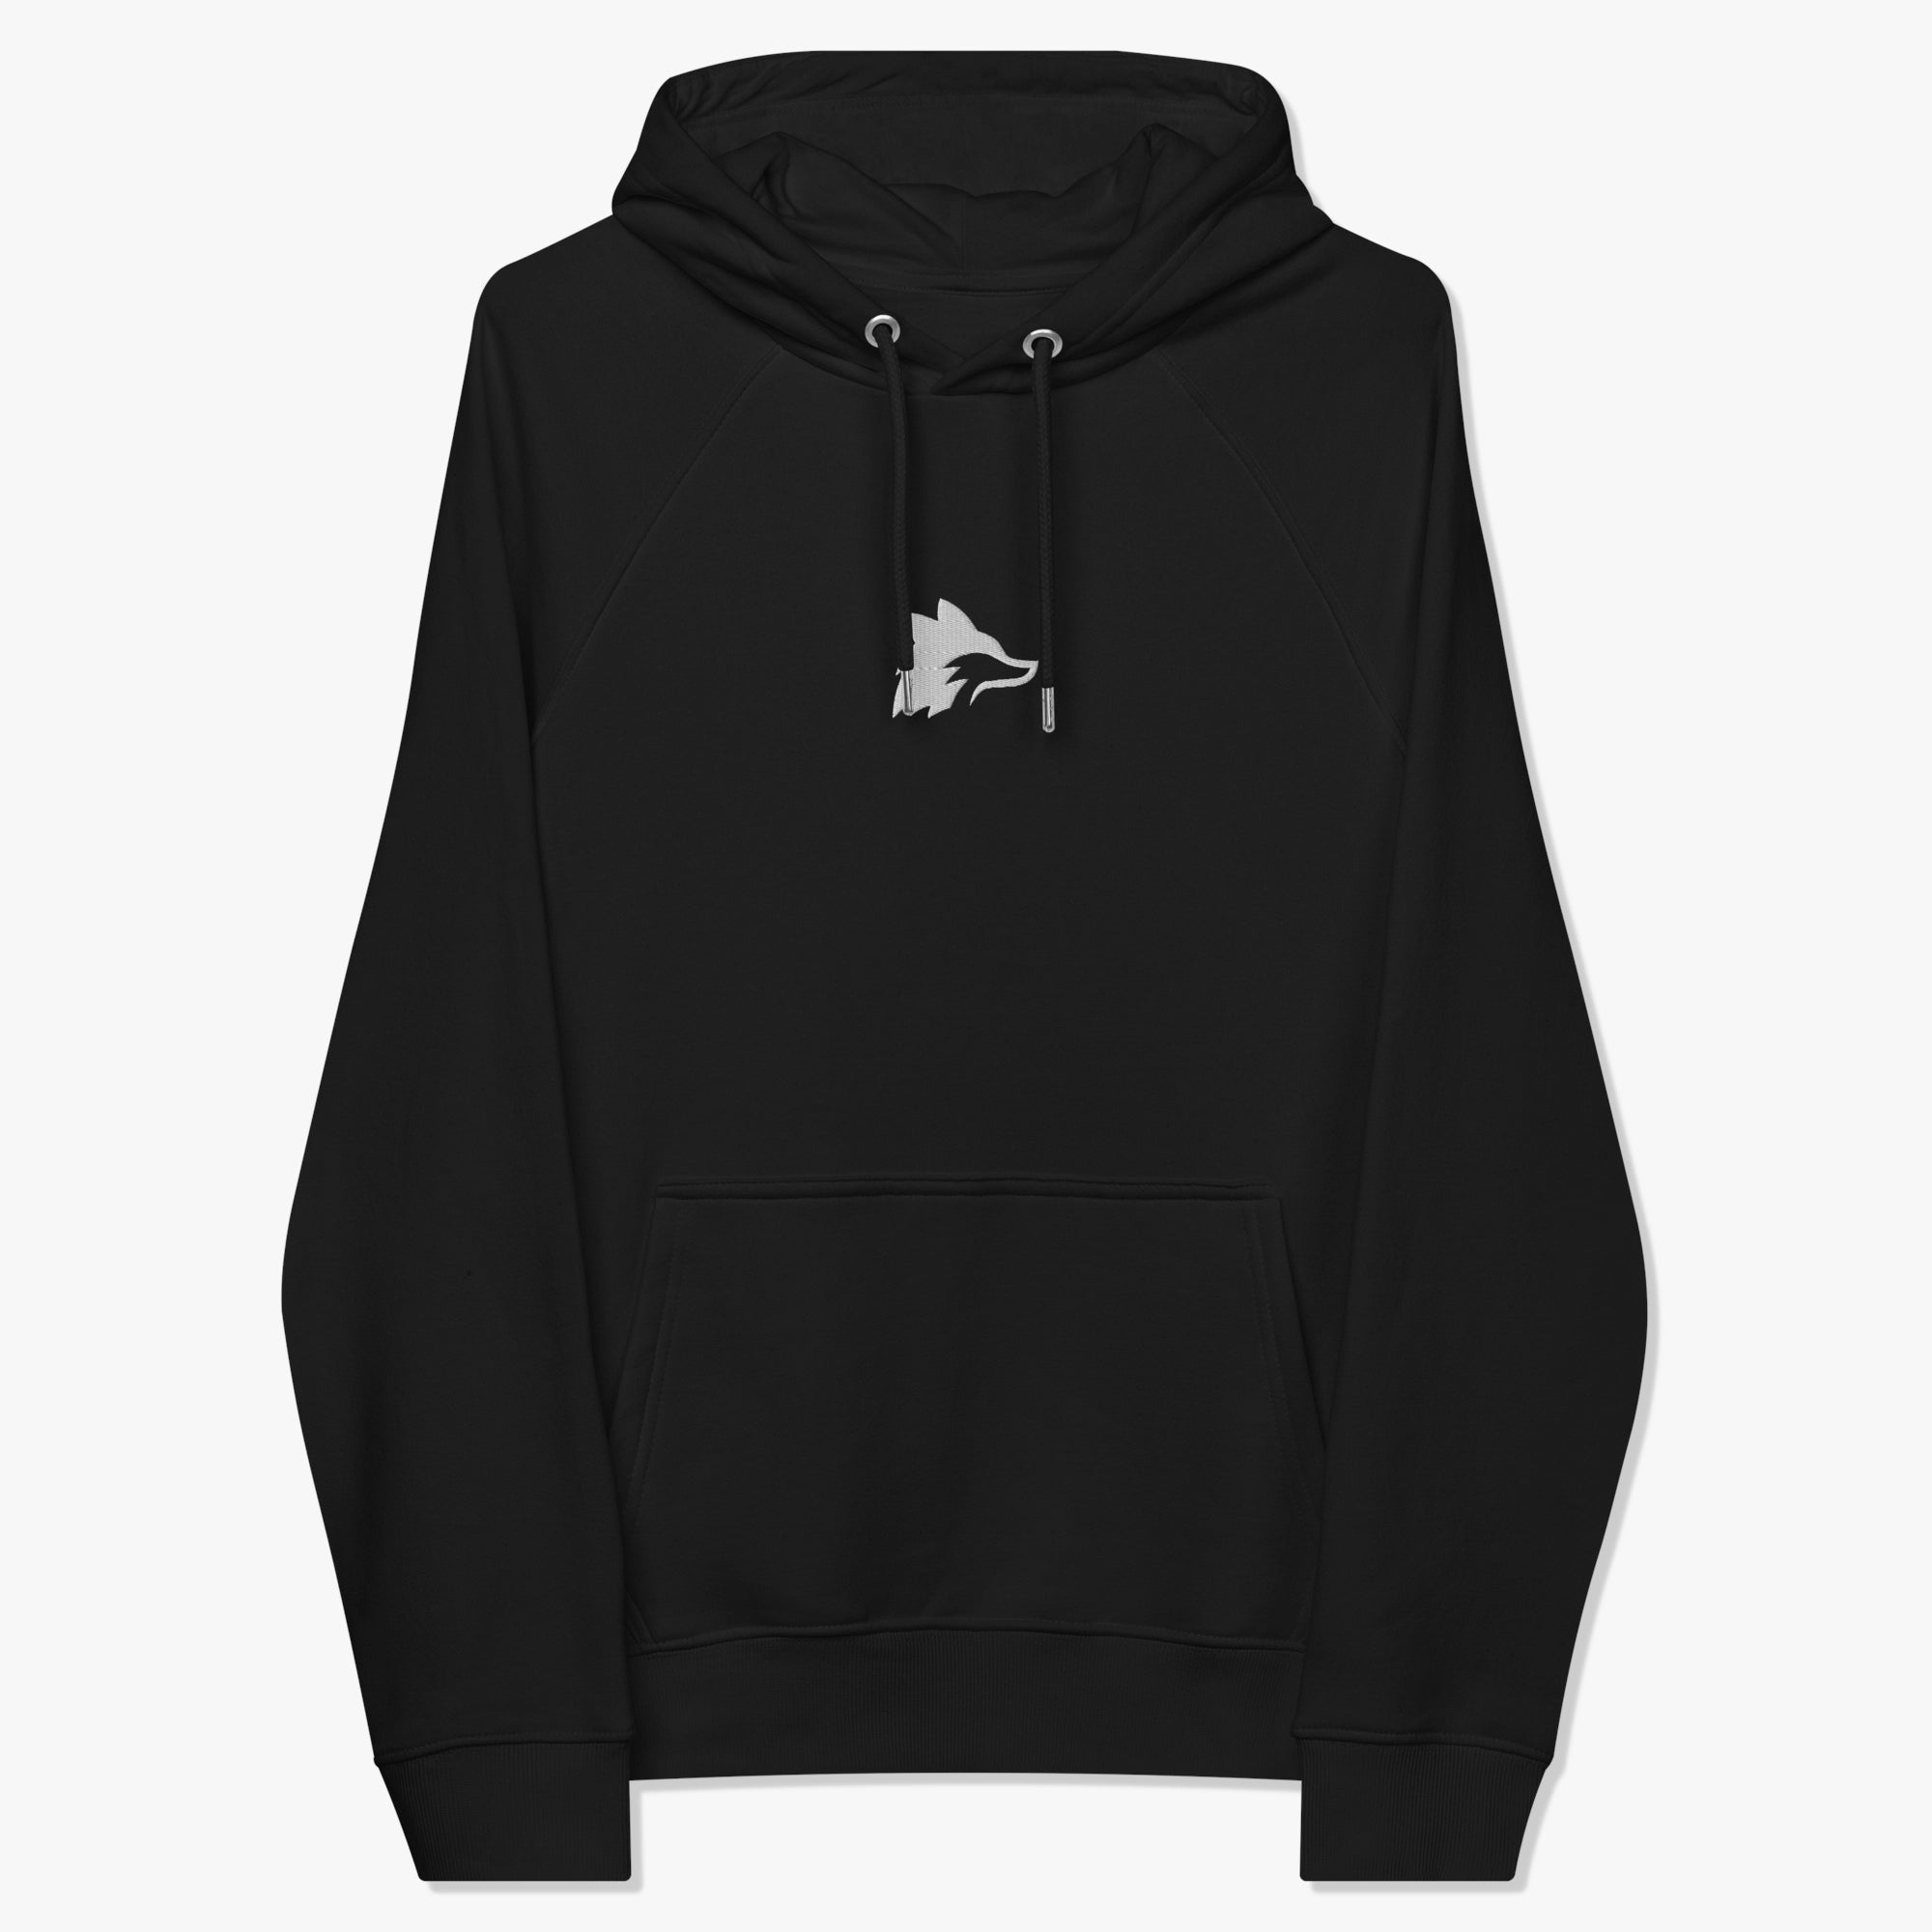 Elevate your style with the Stock 24 Hoodie in Black. Made from a blend of 80% cotton and 20% polyester, this hoodie features an embroidered design on the front for a touch of sophistication. Enjoy comfort with a jersey-lined hood, ribbed cuffs, and hem. The front pouch pocket and matching drawstrings add practicality. Crafted with preshrunk fabric and double-needle stitching on all seams, this hoodie is a stylish and durable choice for everyday wear.